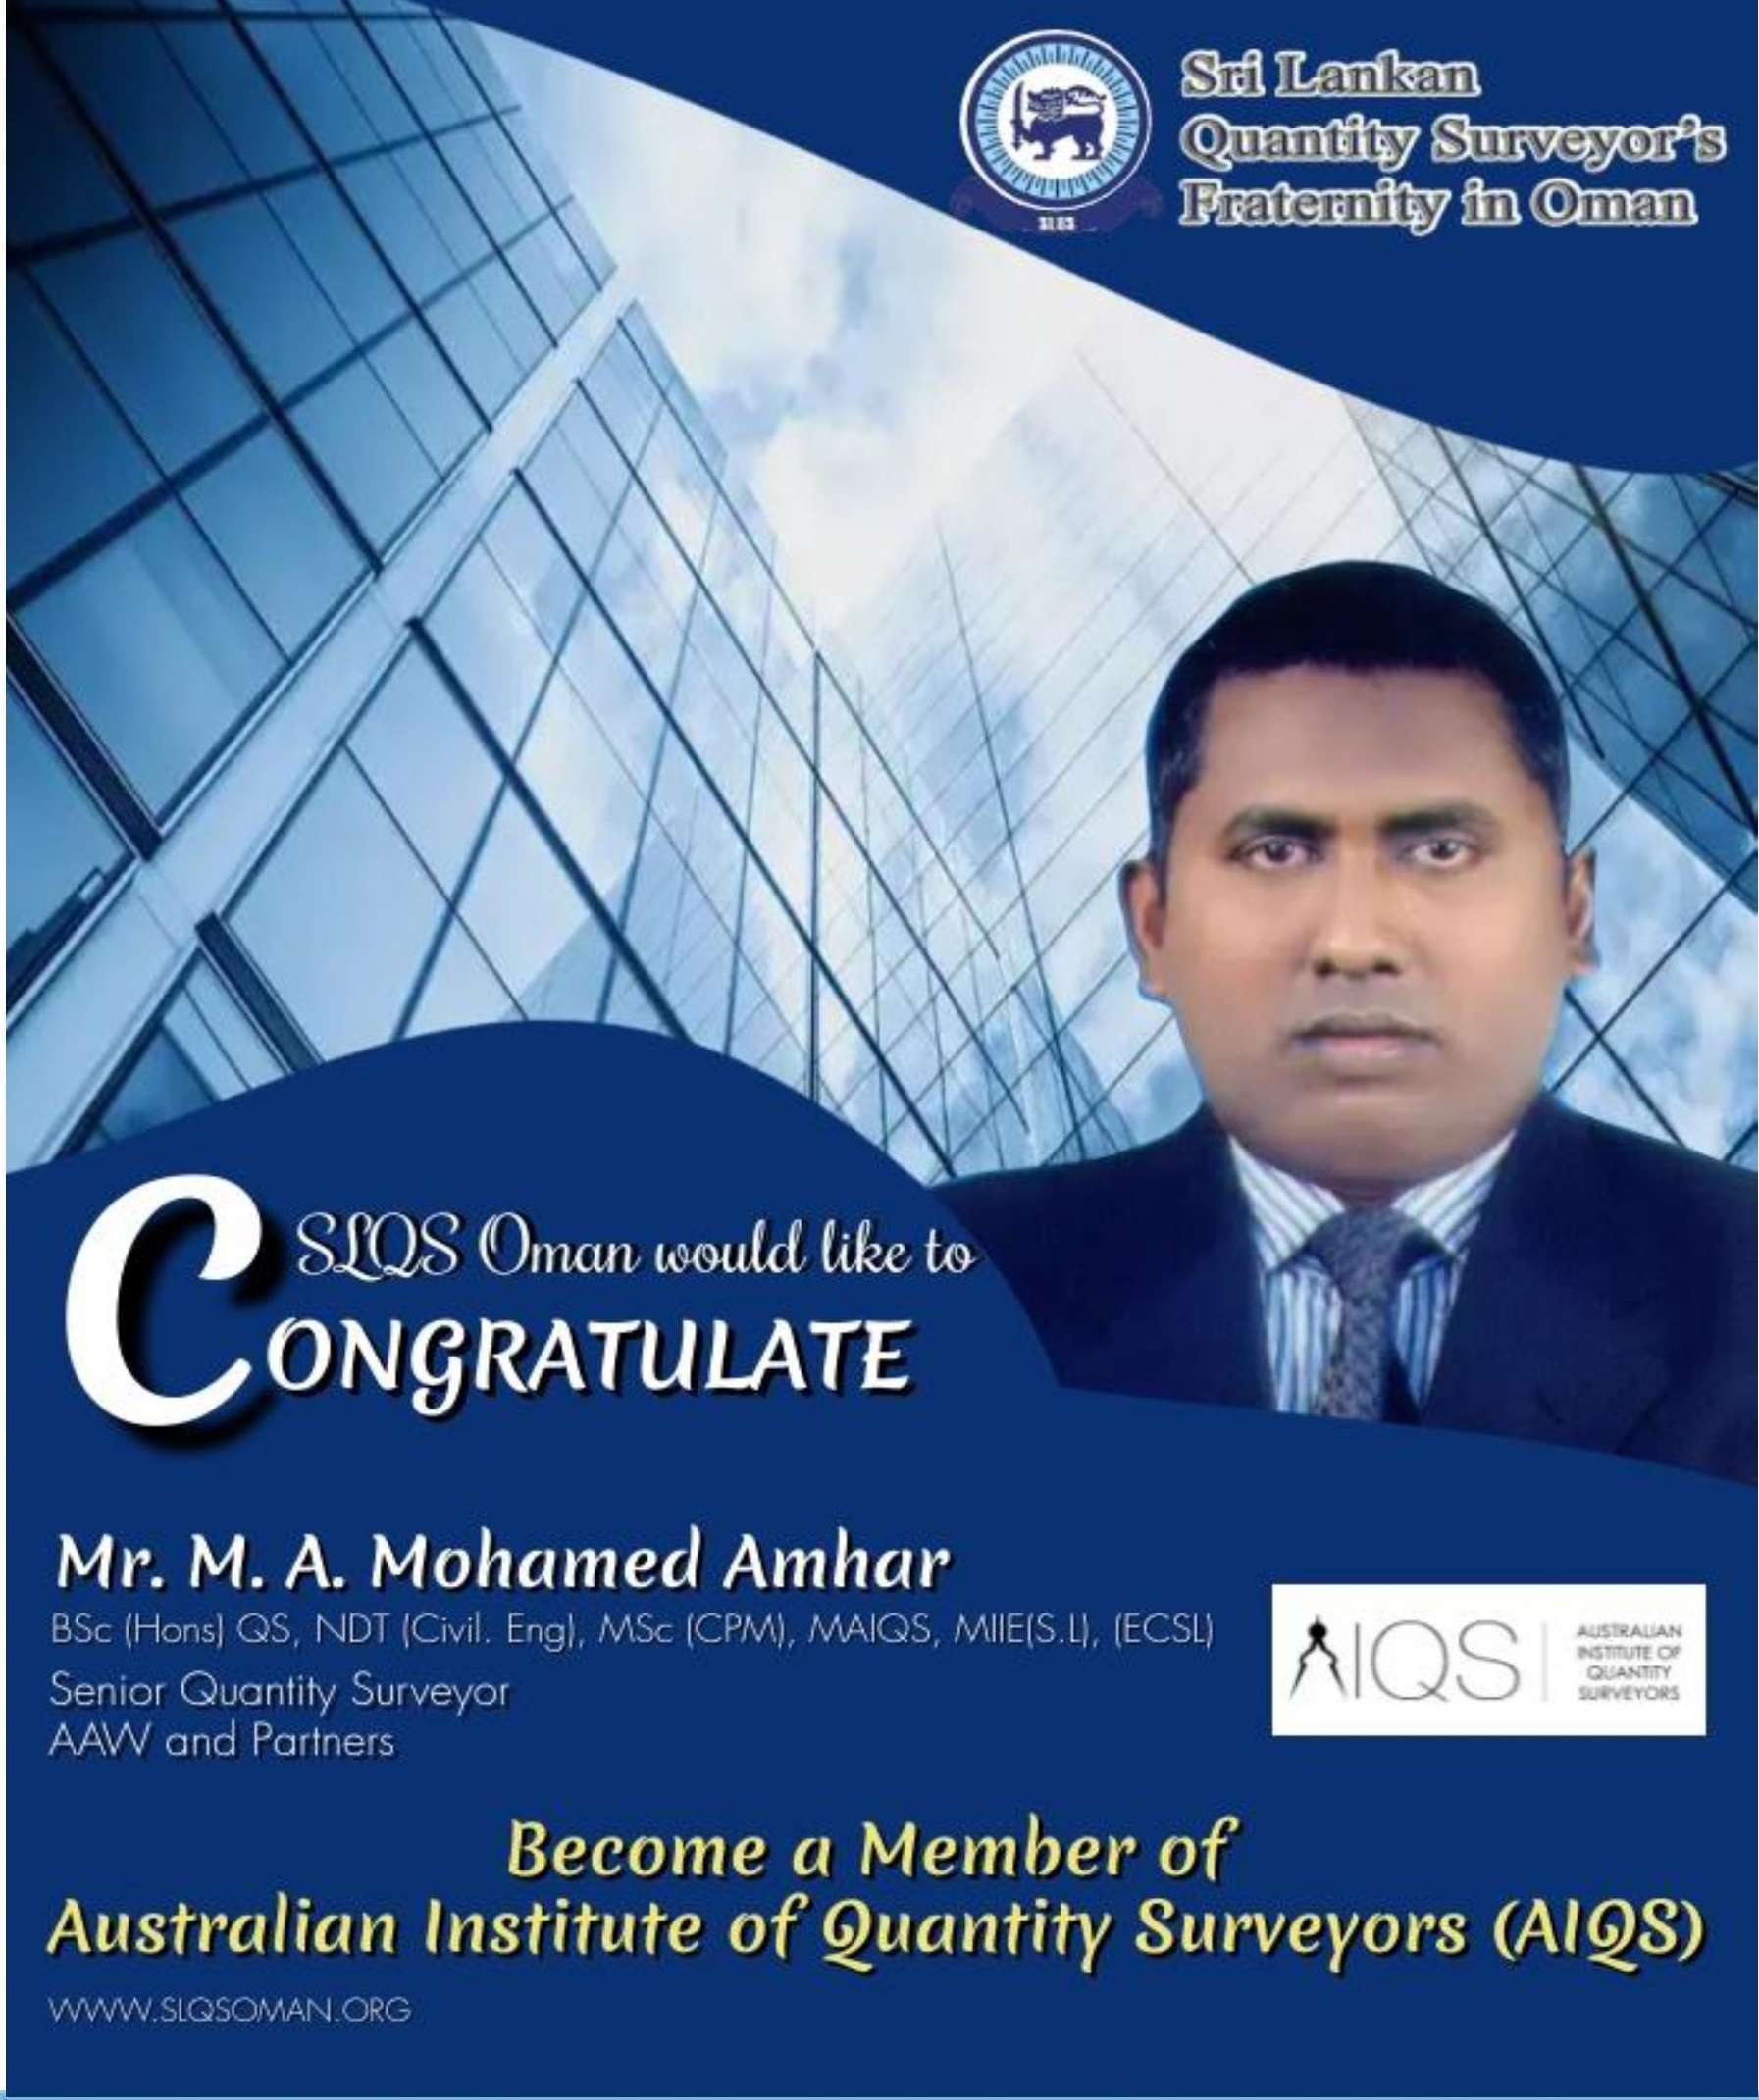 Congratulations!! Mr M.A.Mohamed Ambar !! For Becoming A Member of AIQS